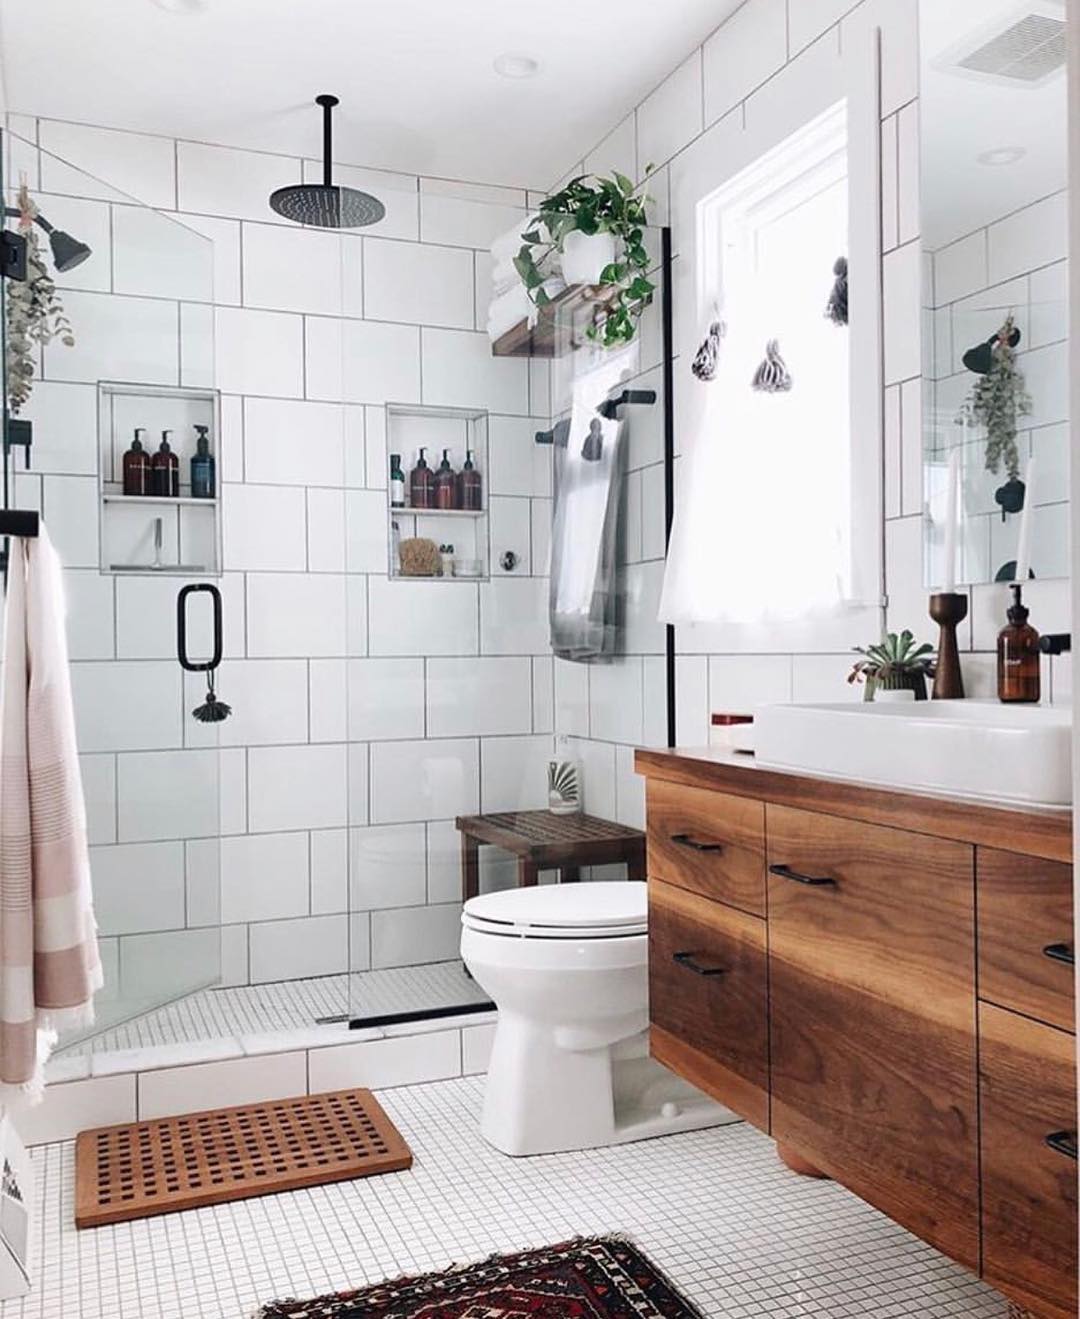 30 Of The Most Beautiful Bathroom Designs 2019 Page 12 Of 34 Hairstylesofwomens Com,Cute Simple Tattoo Designs For Girls On Hand